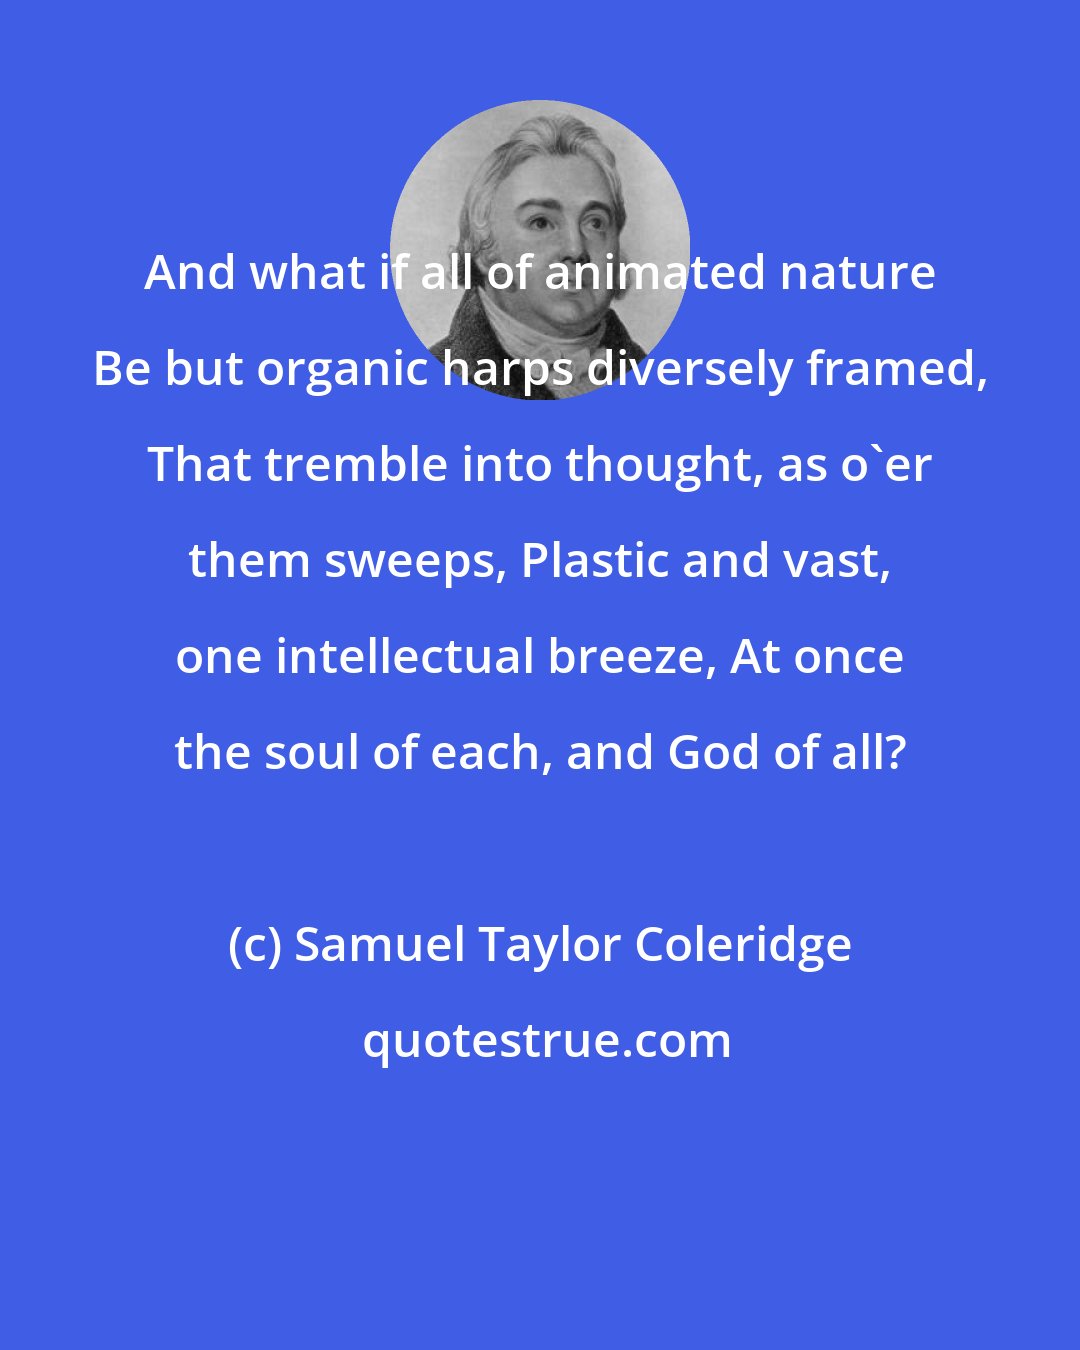 Samuel Taylor Coleridge: And what if all of animated nature Be but organic harps diversely framed, That tremble into thought, as o'er them sweeps, Plastic and vast, one intellectual breeze, At once the soul of each, and God of all?